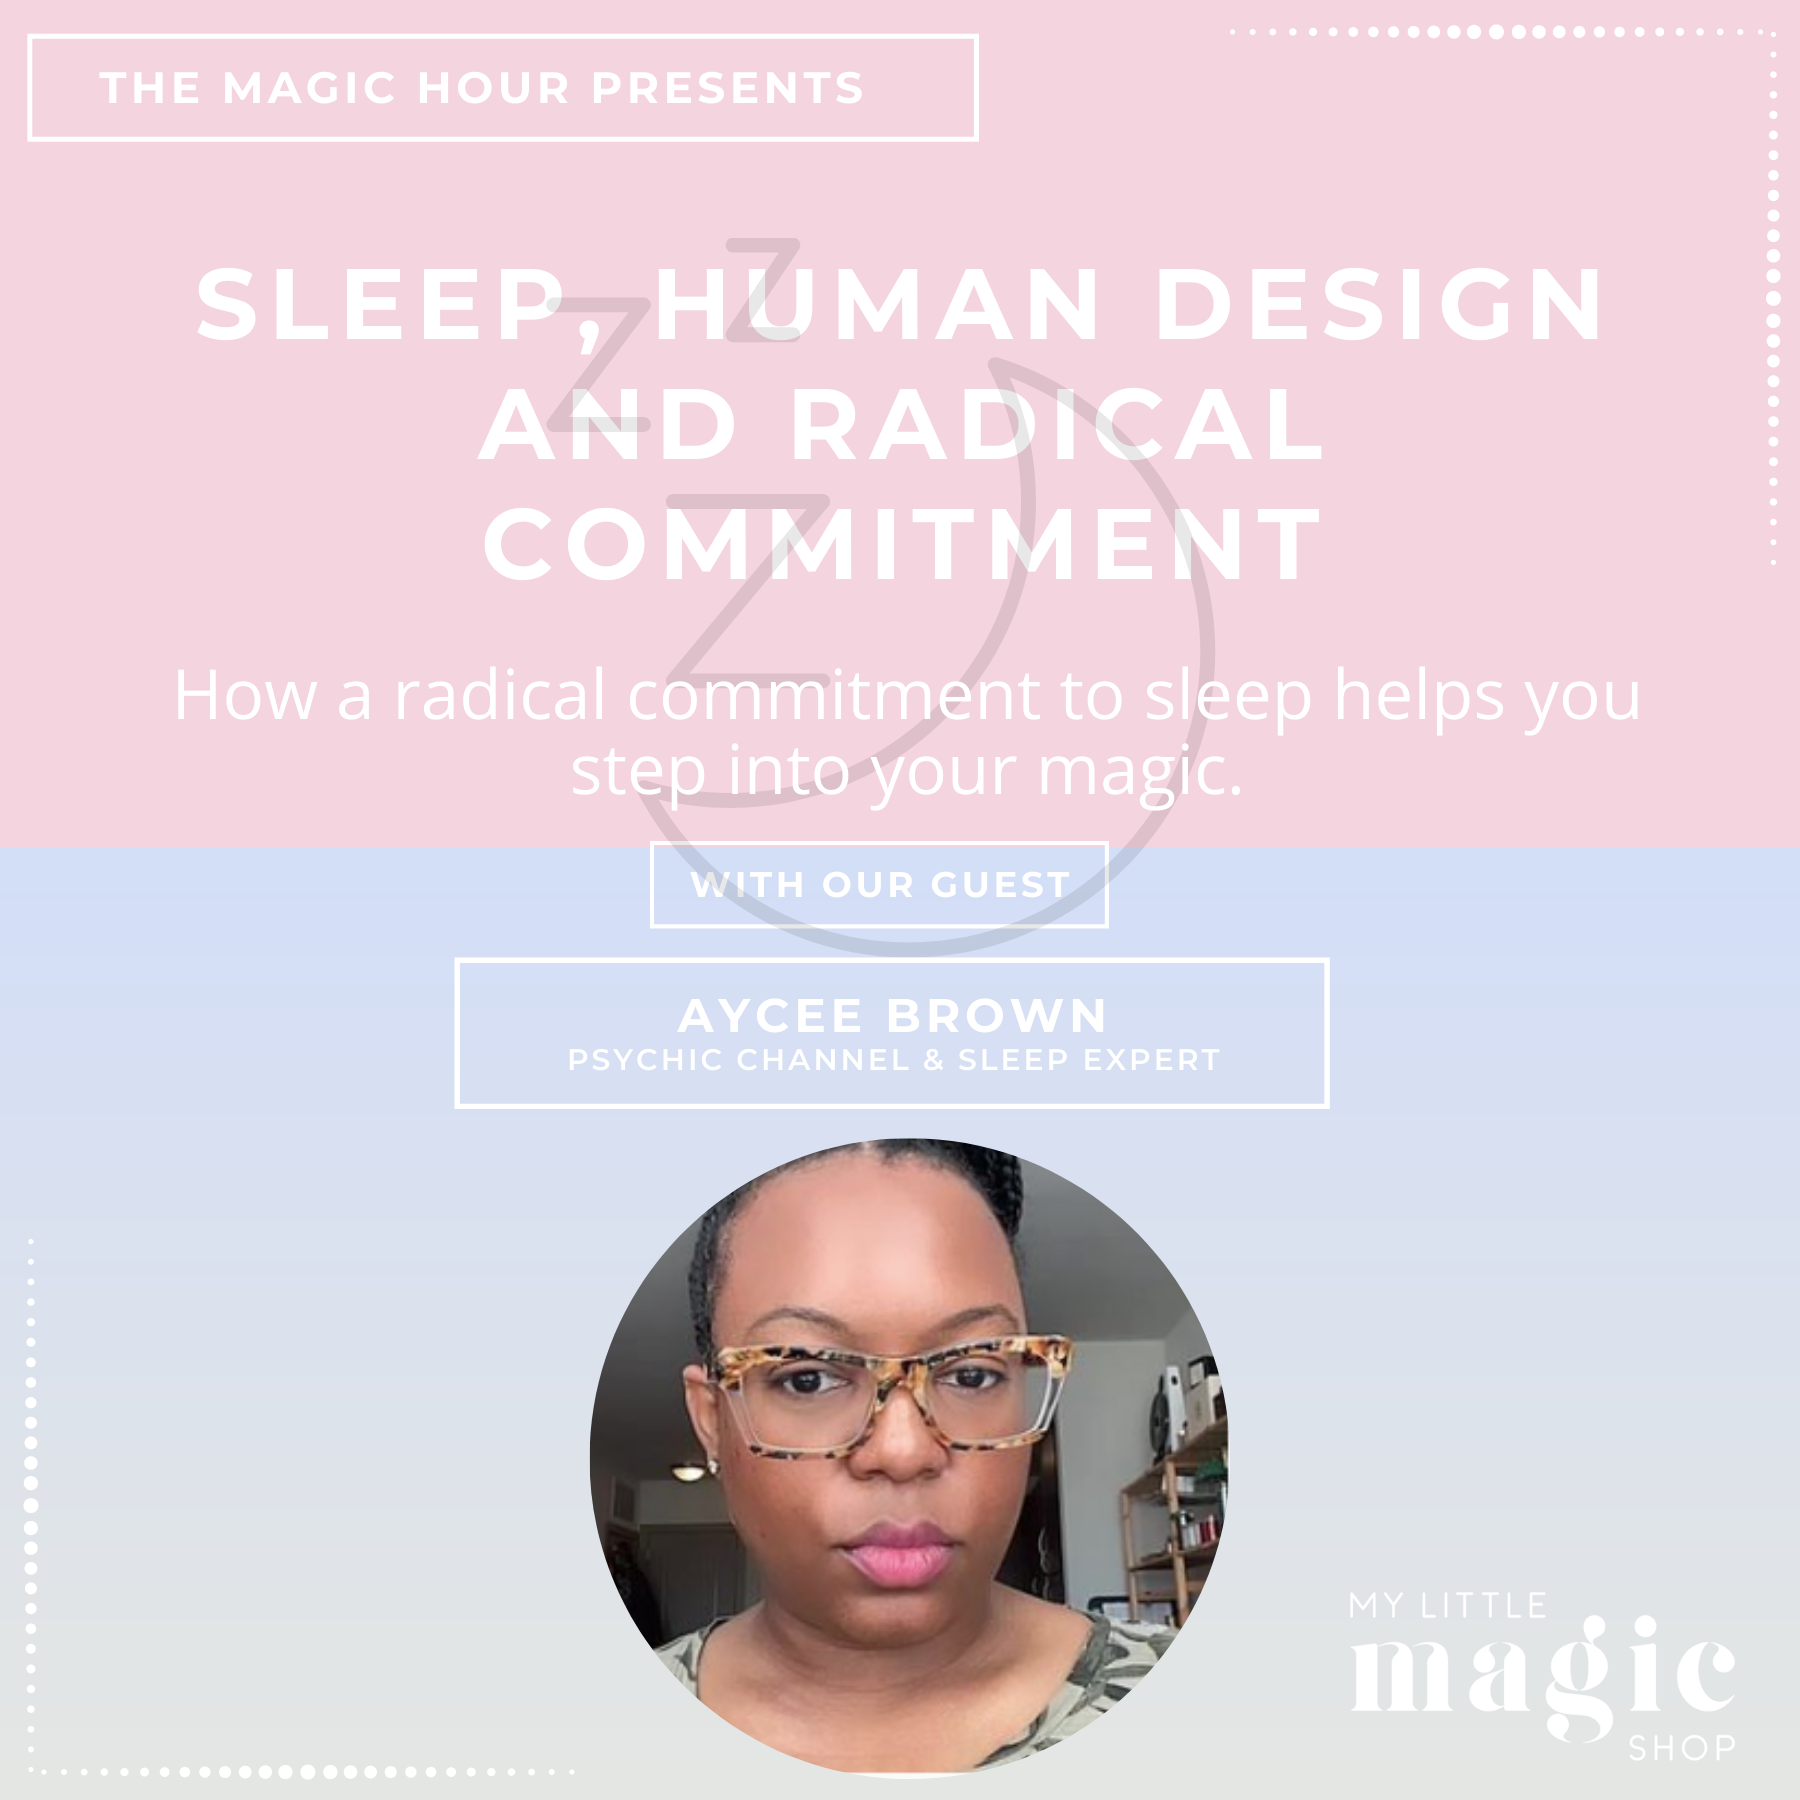 Sleep, Human Design and Radical Commitment with Aycee Brown